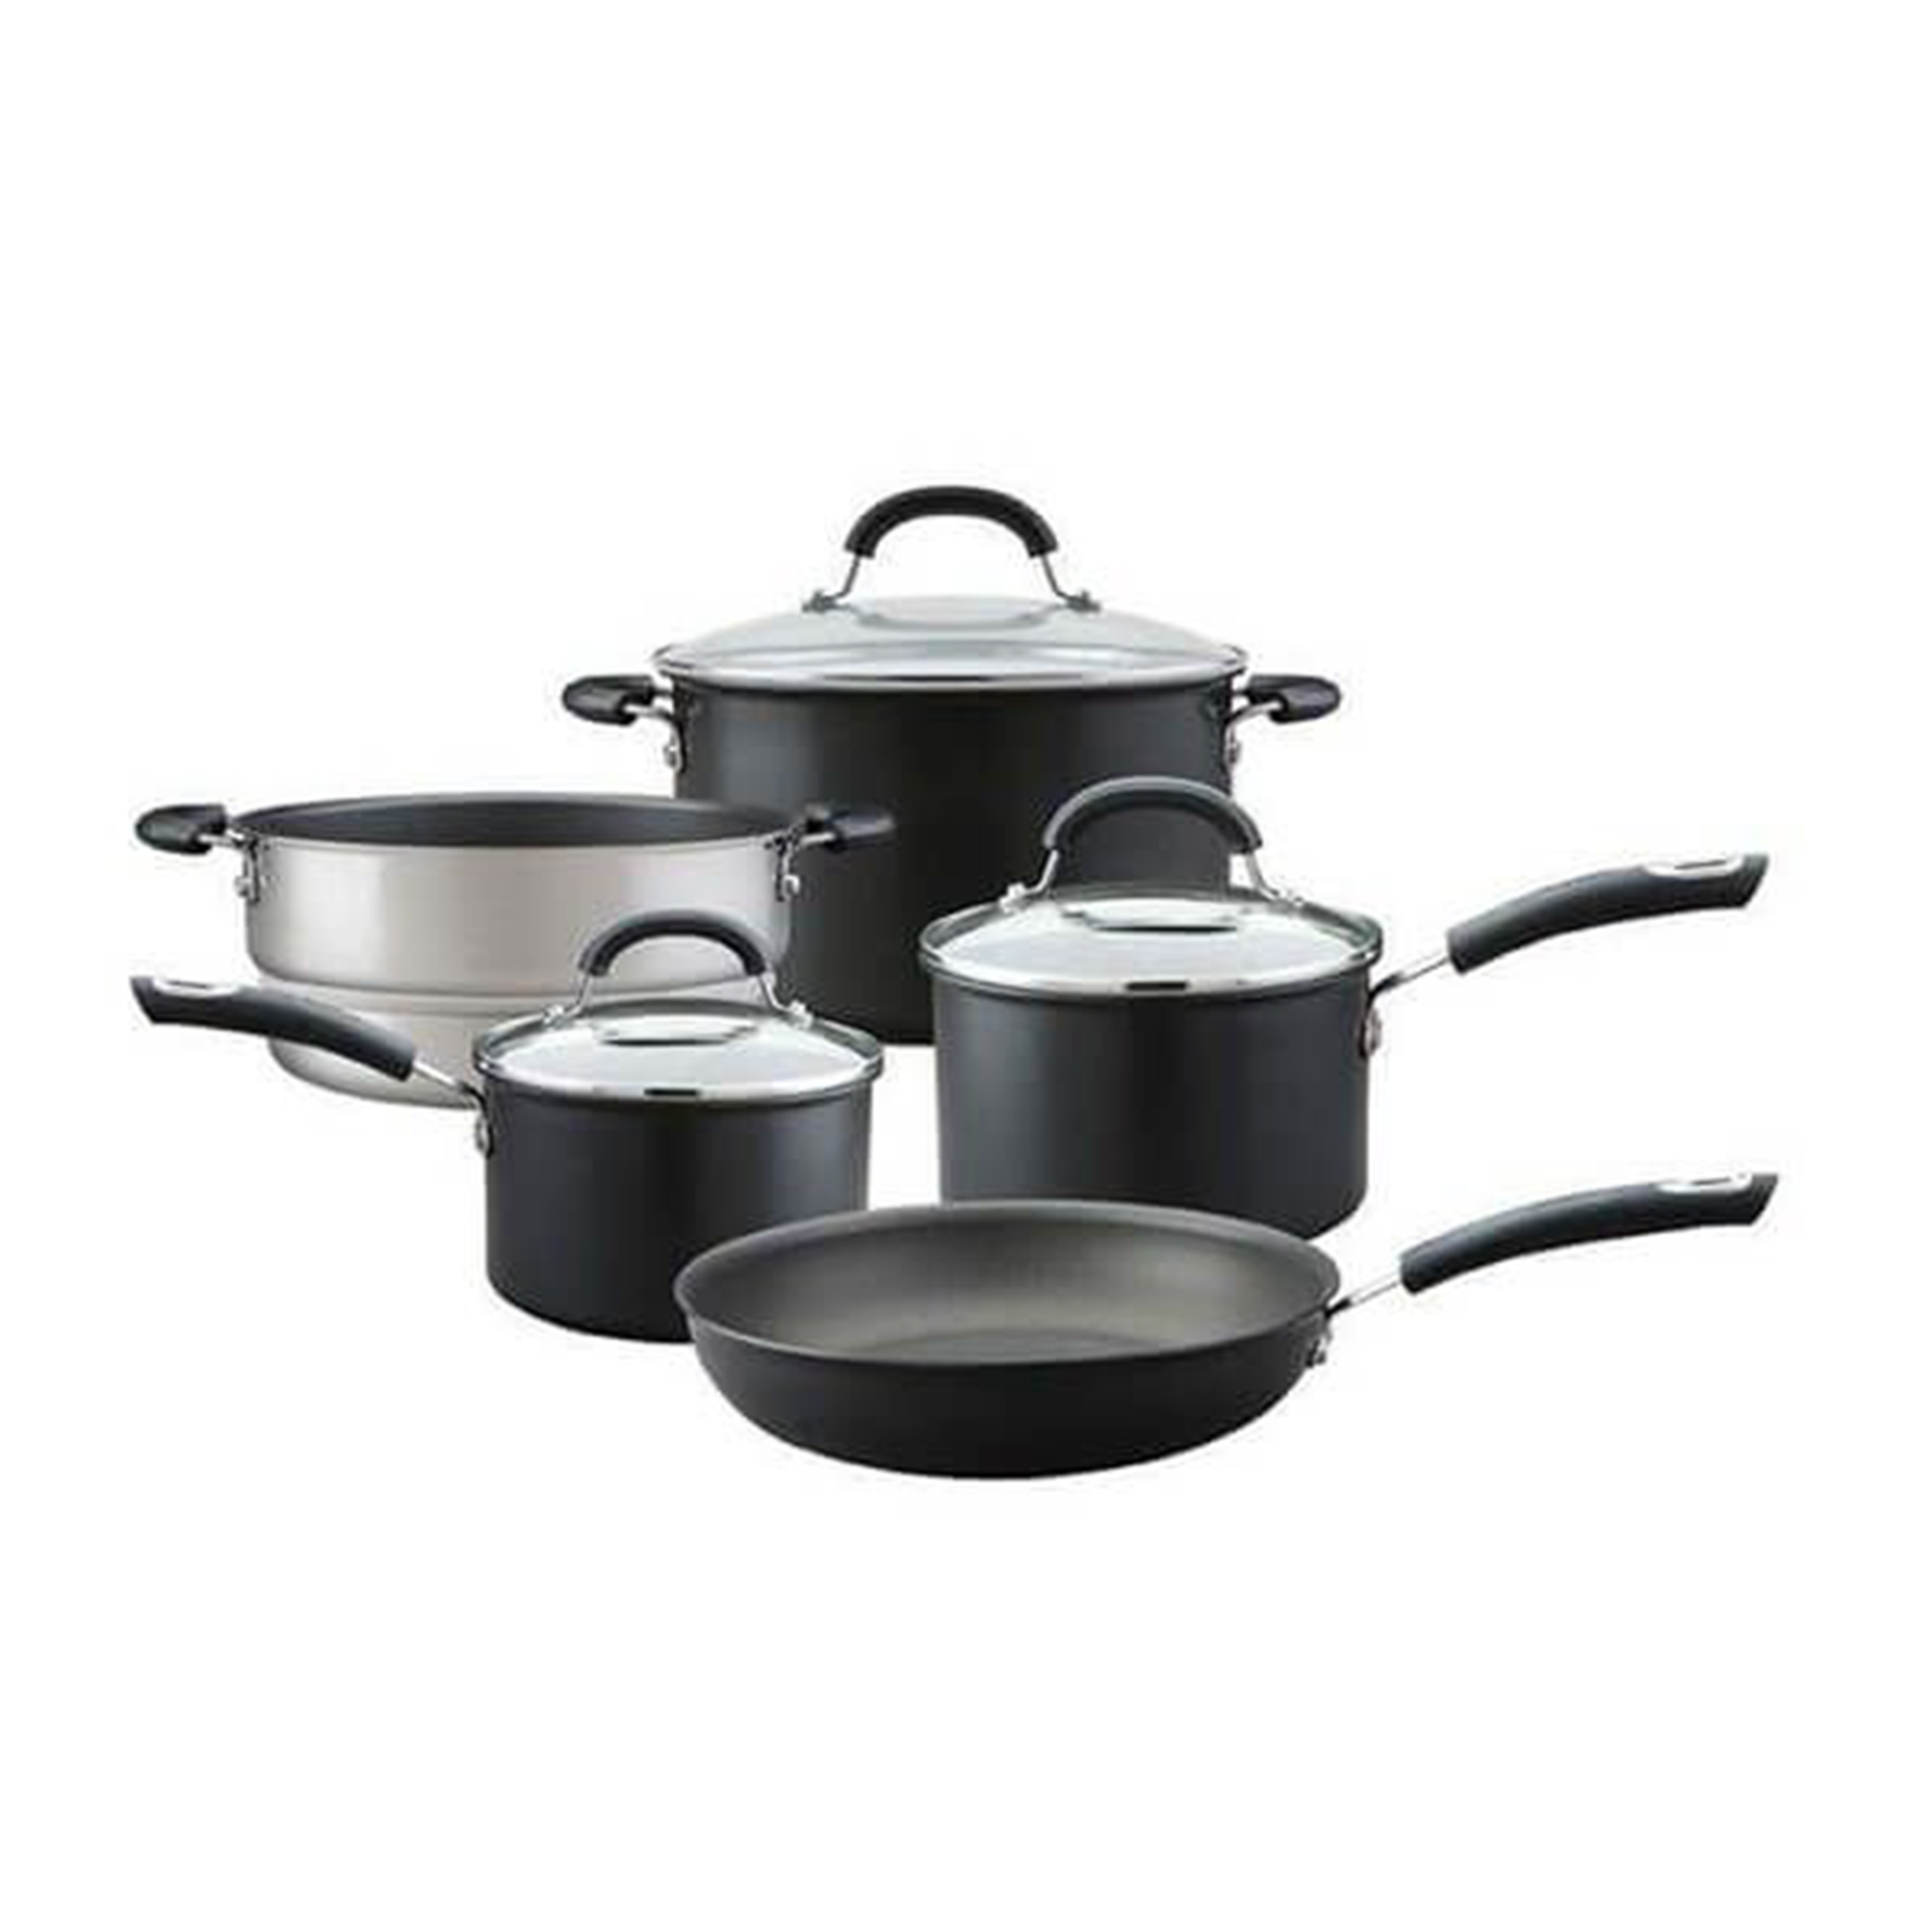 an image depicting the 5 piece set - two saucepans, a frying pan, a pot and a steamer